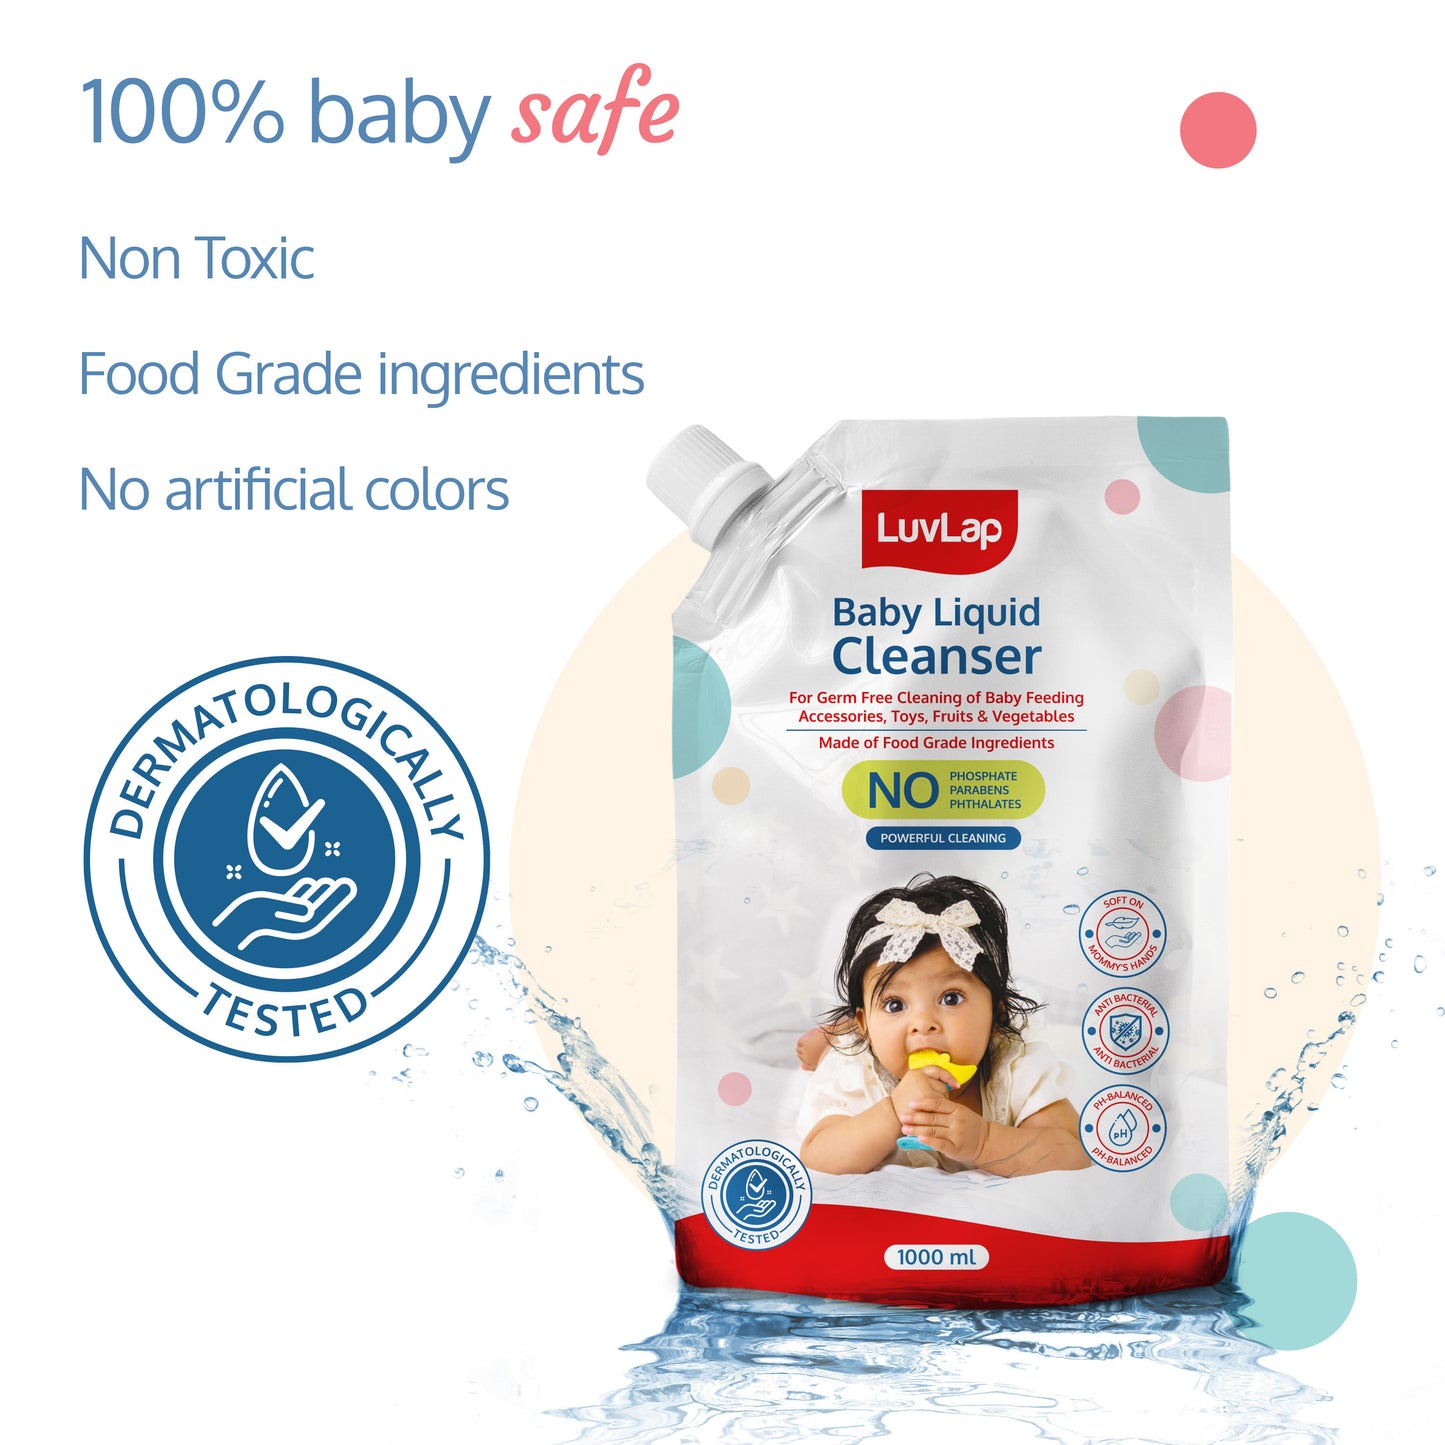 Baby Liquid Cleanser Refill pack- 1000ml, For cleaning feeding bottle, cutlery, toys, fruits & vegetables, Kills 99.9% Germs, pH Balanced Dermatologically tested formula, No harsh chemicals